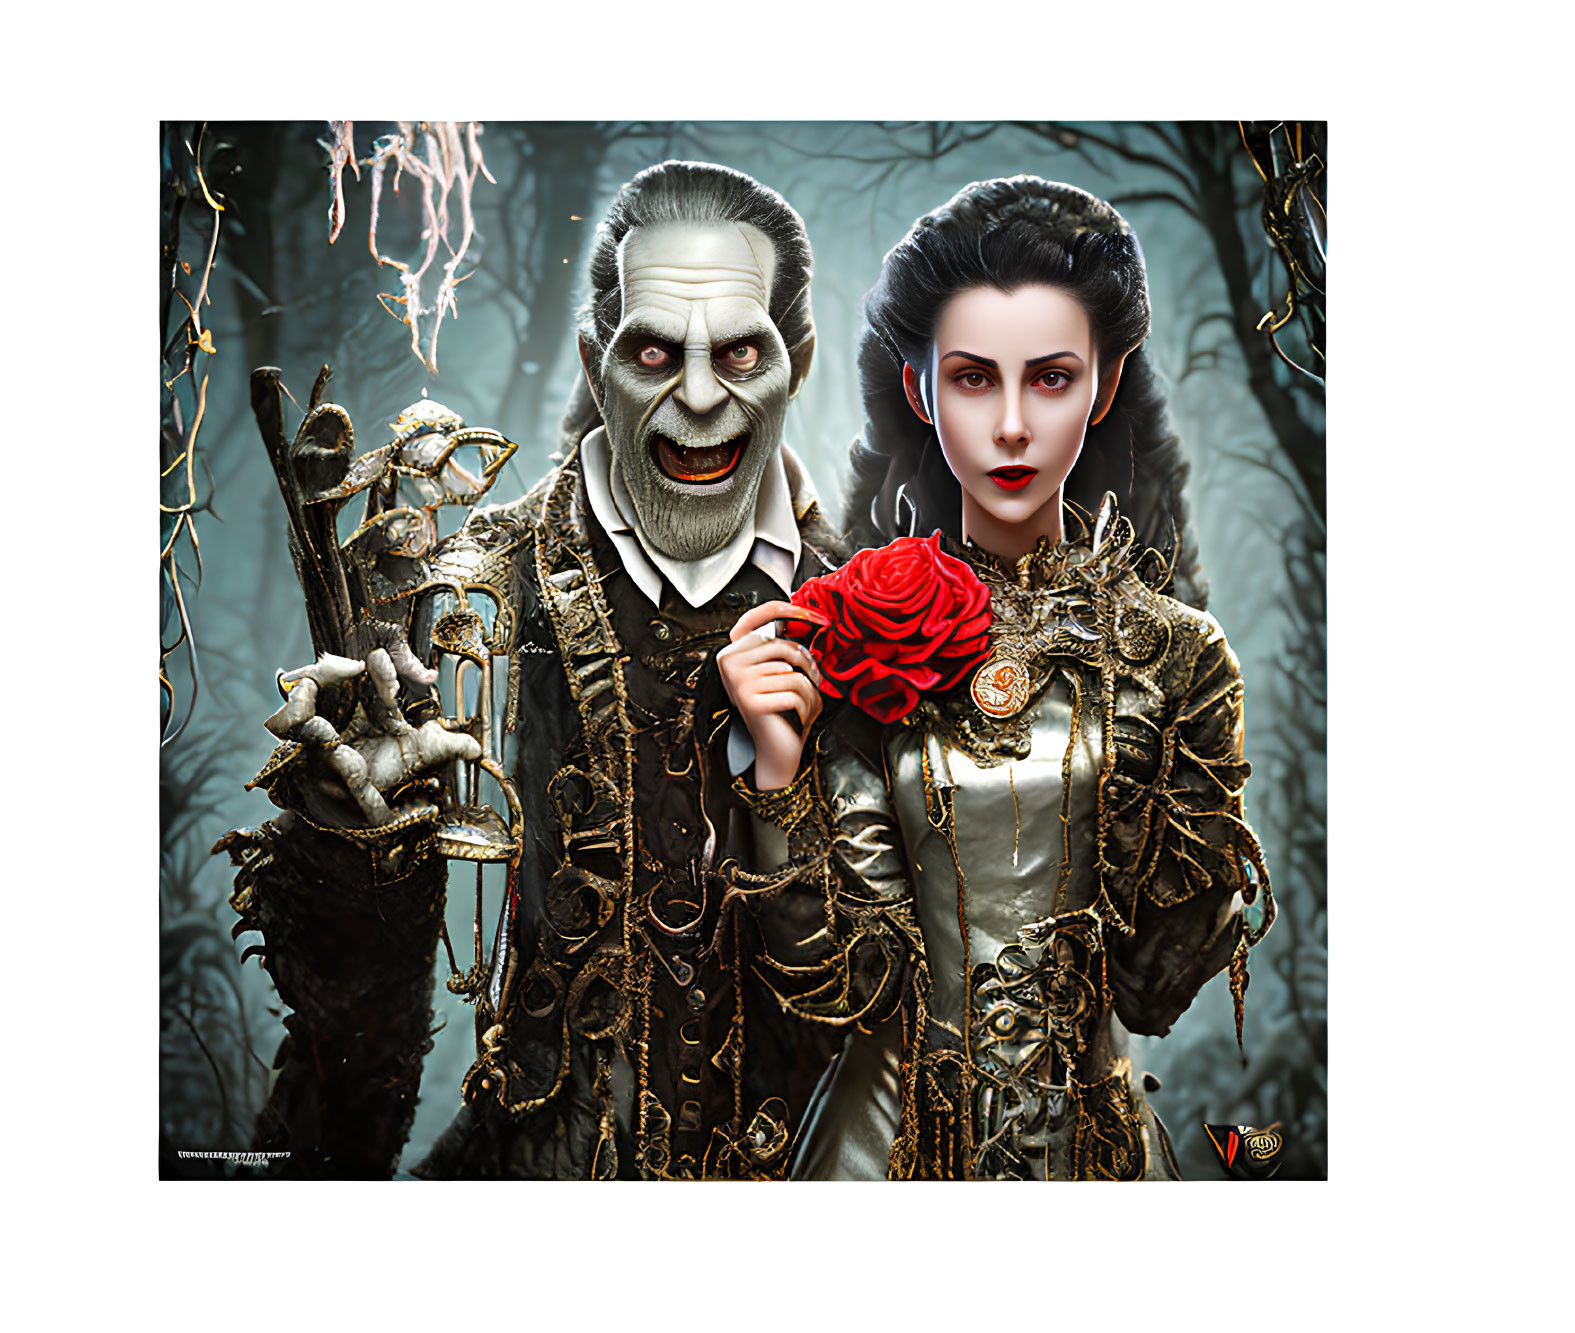 Gothic couple in elaborate costumes with skull-like face and pale skin holding red rose